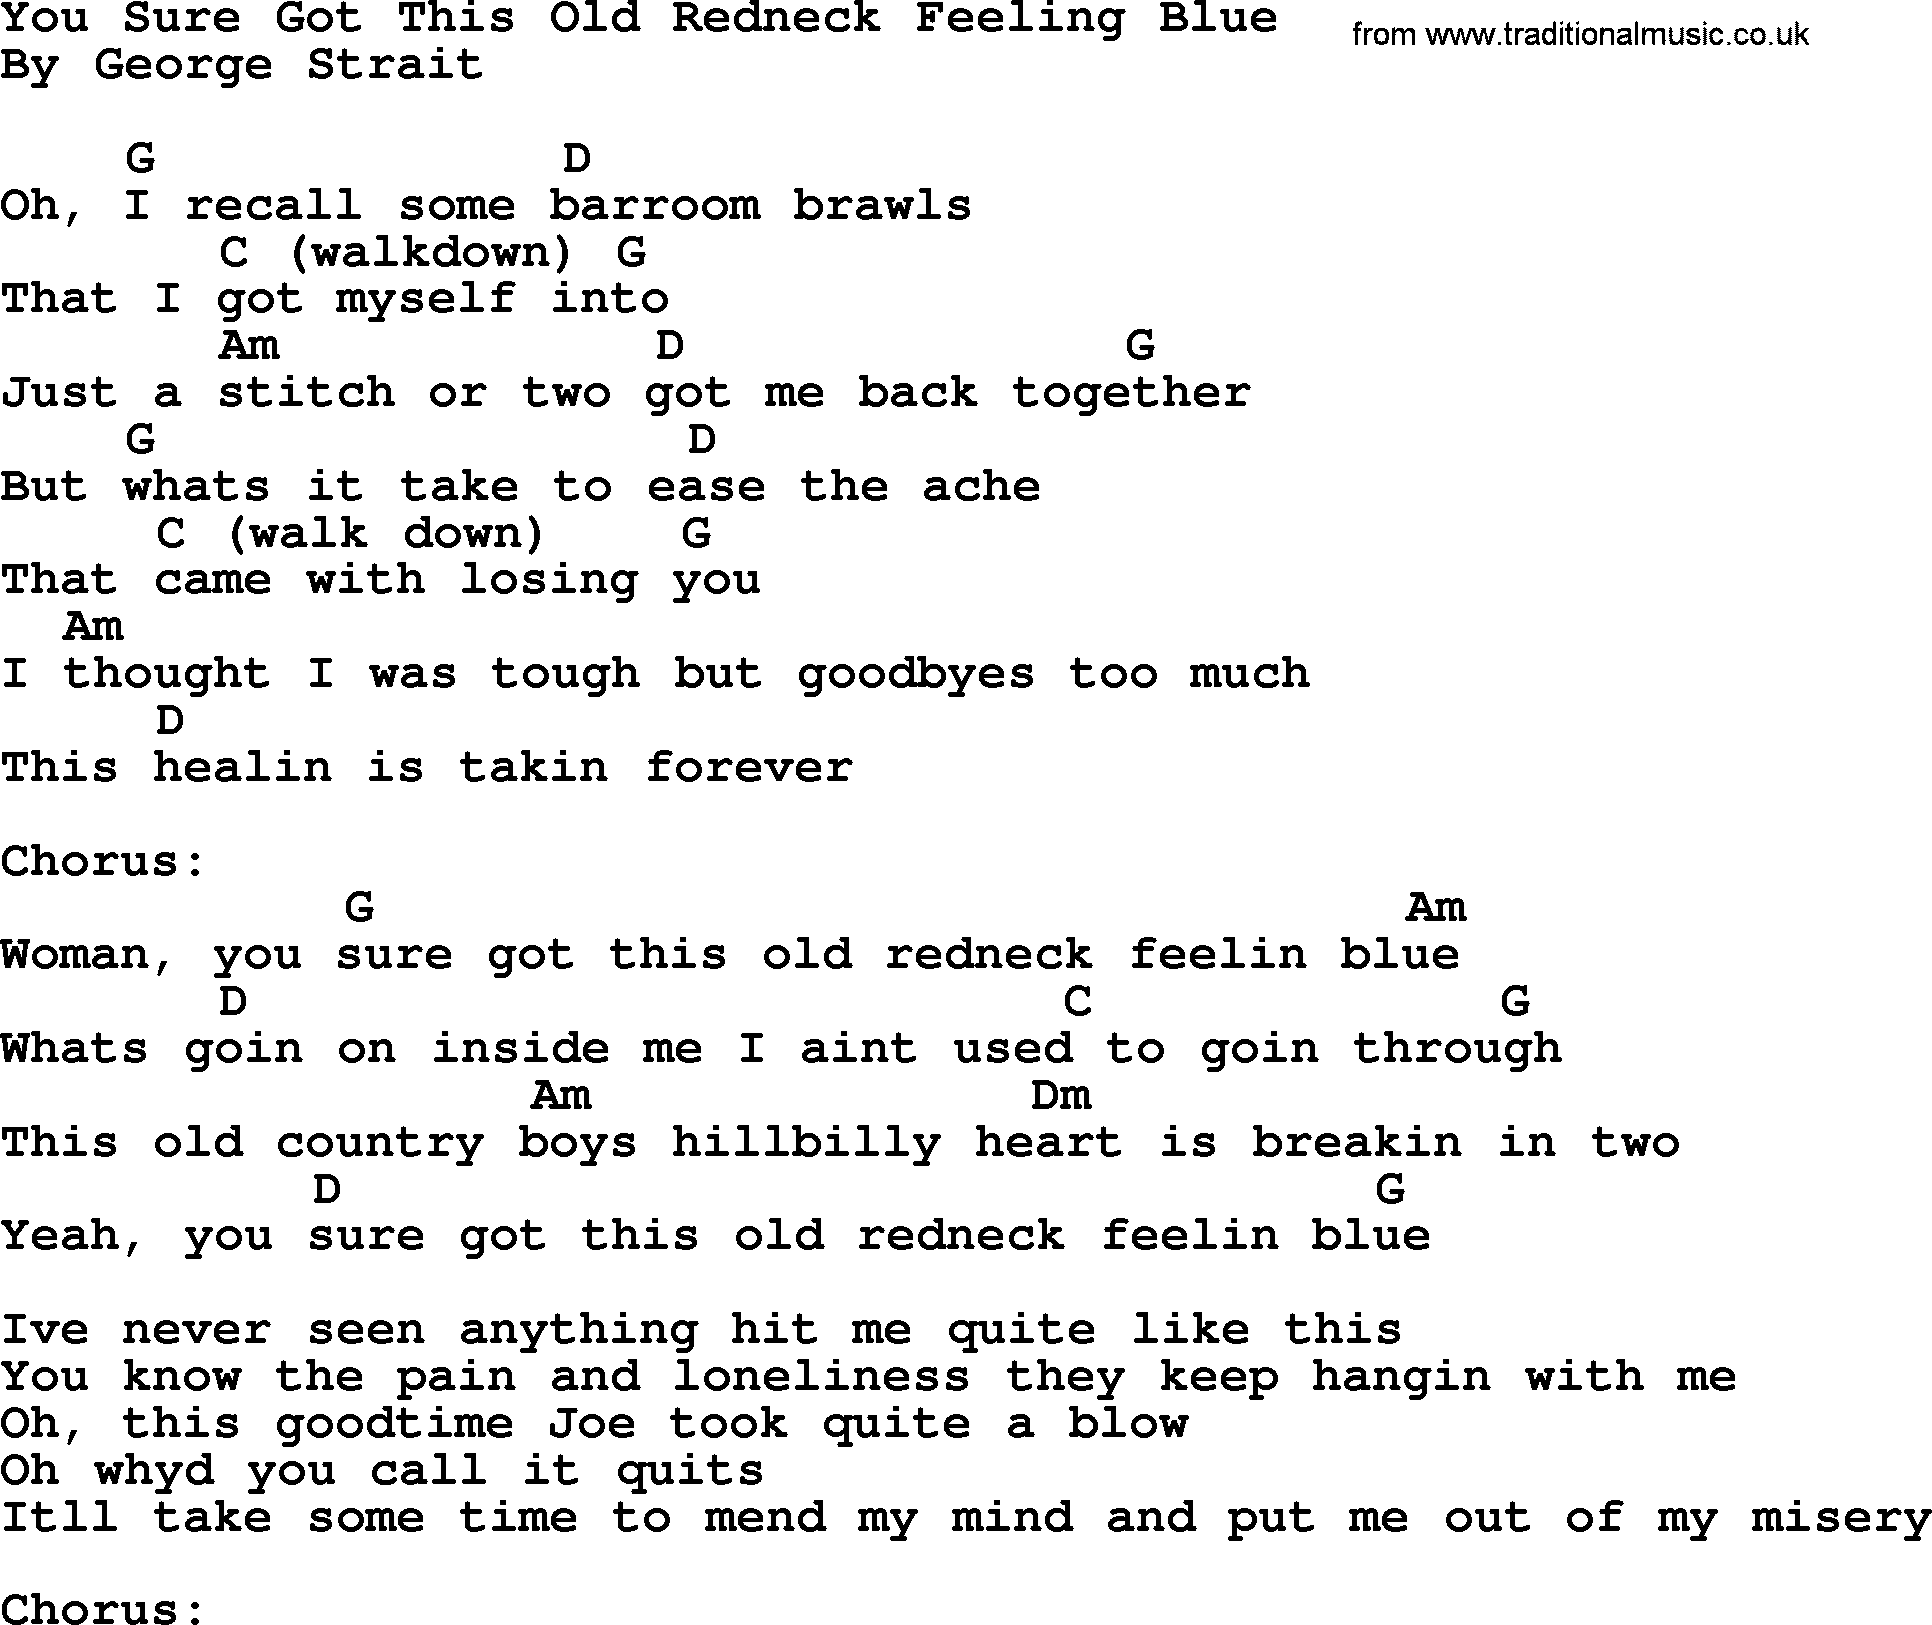 George Strait song: You Sure Got This Old Redneck Feeling Blue, lyrics and chords